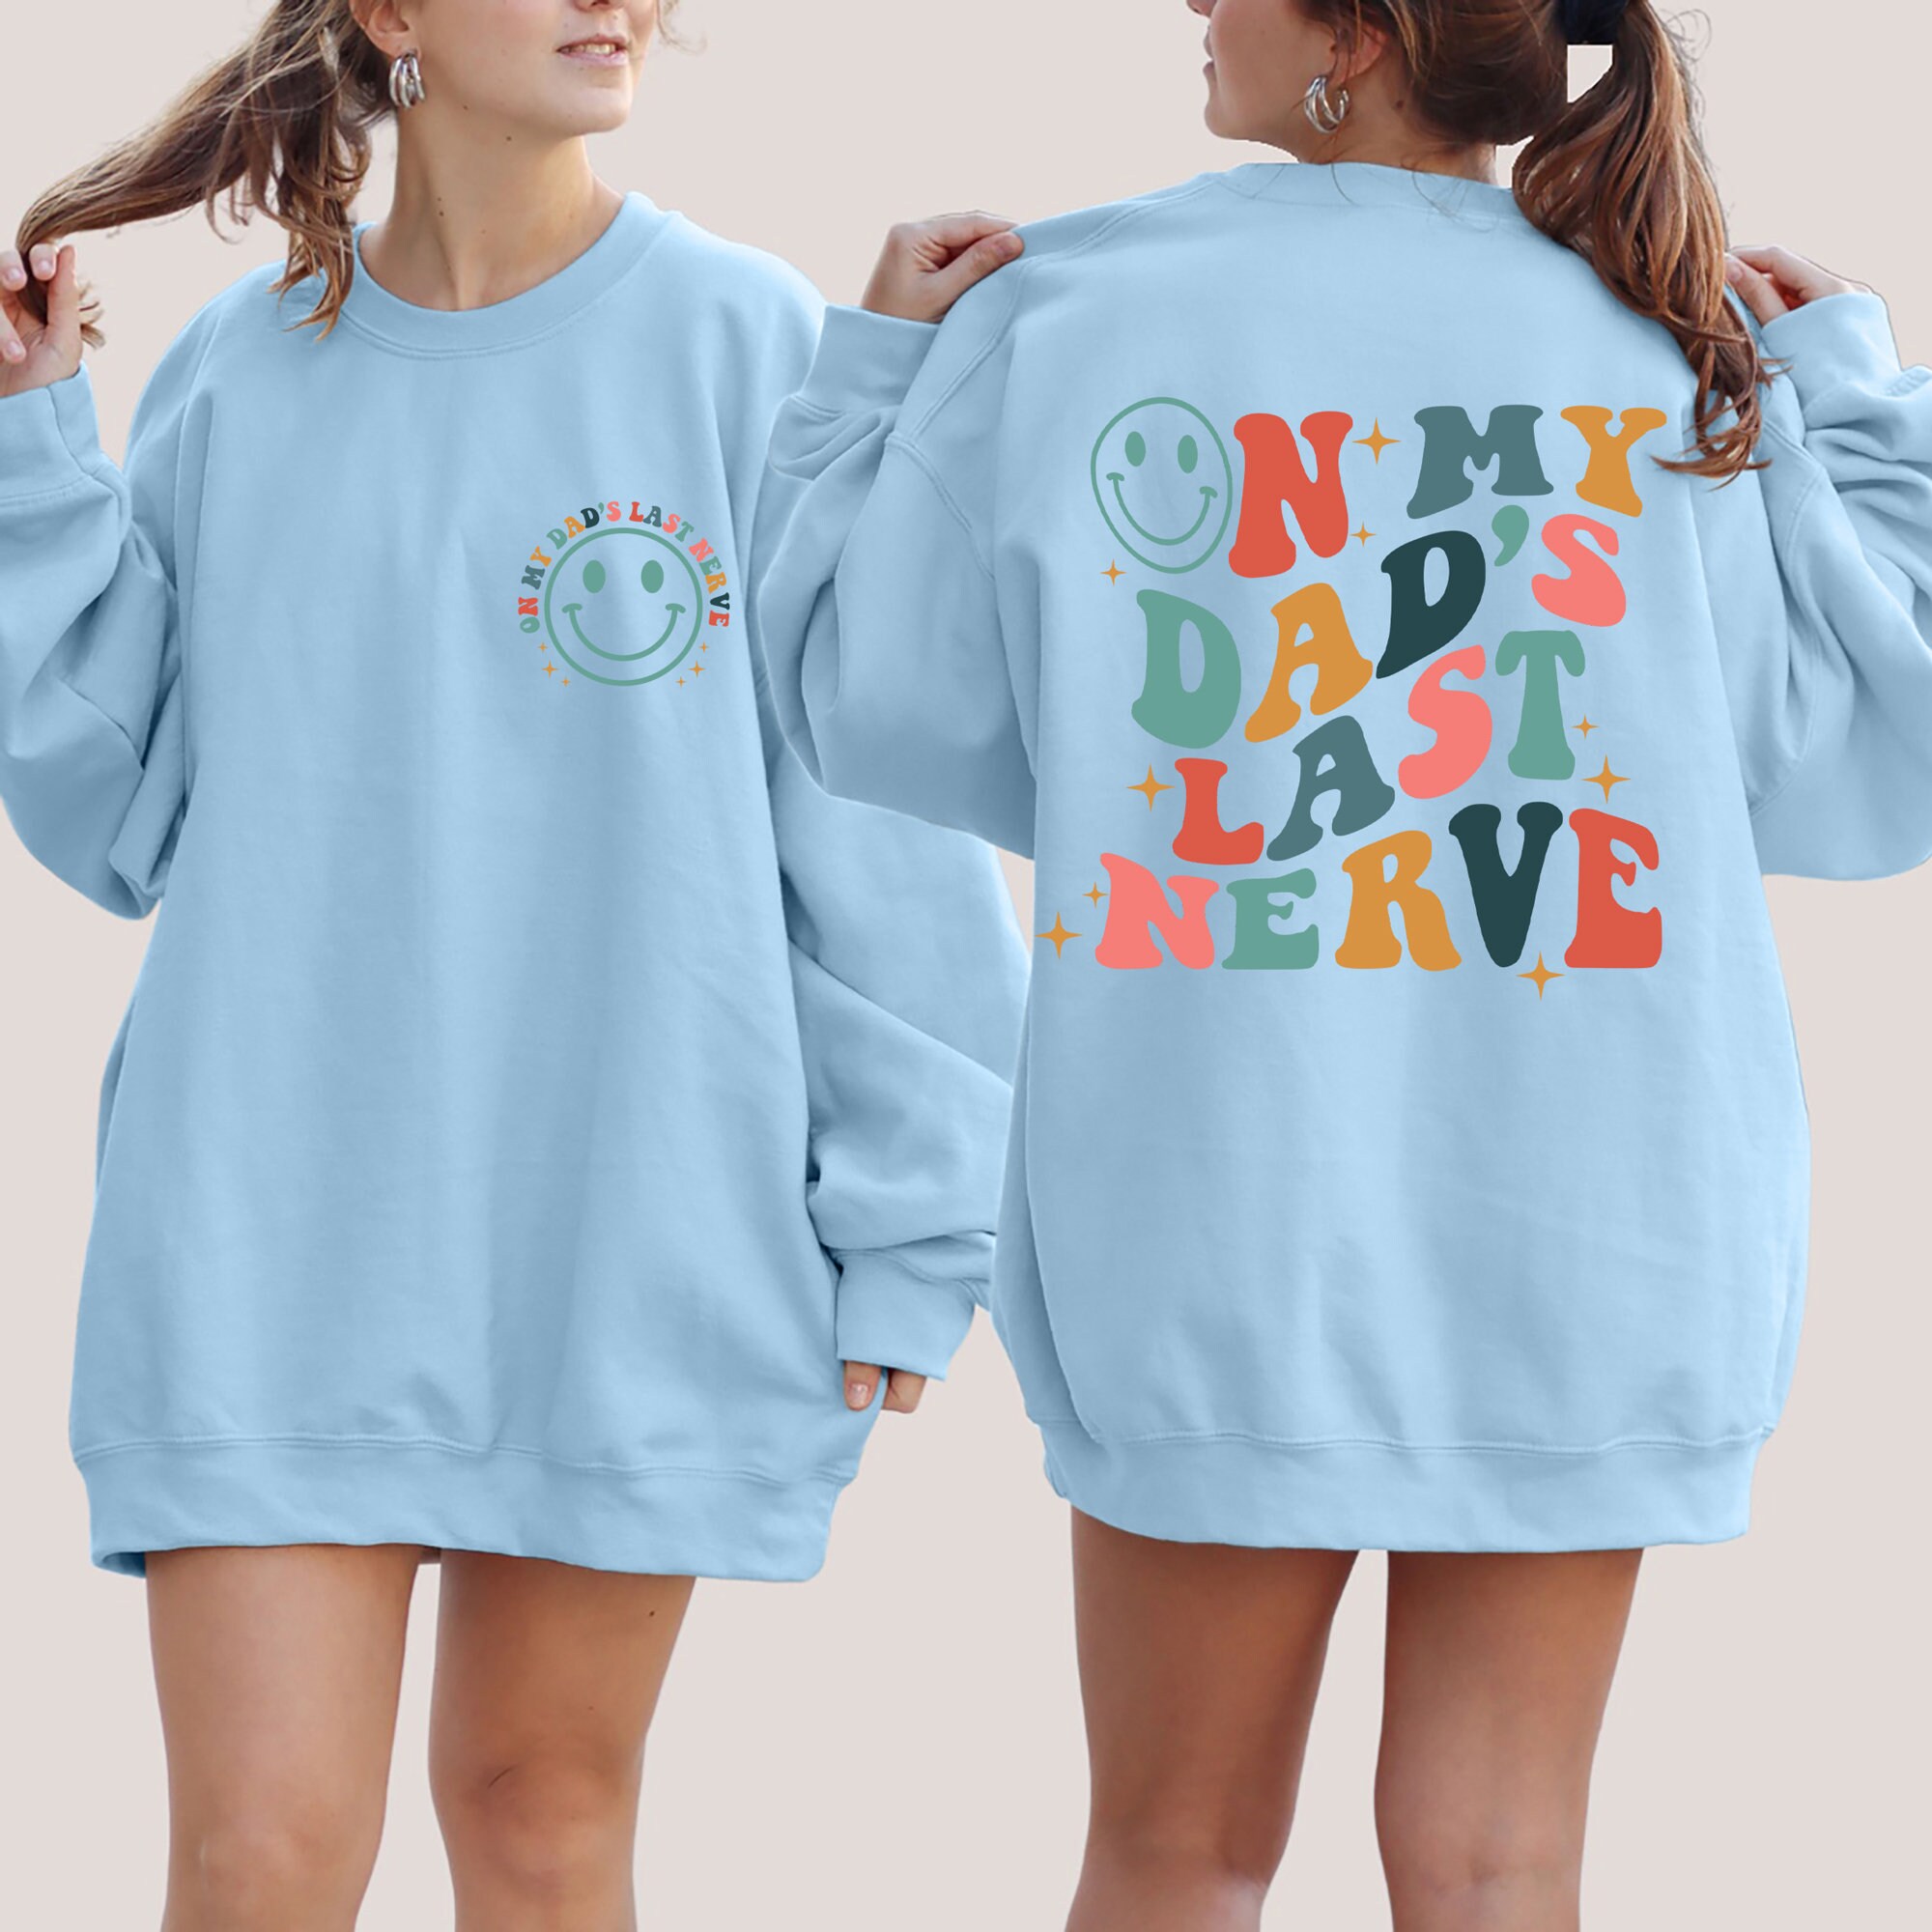 Discover On My Dad's Last Nerve Double Sided Sweatshirts